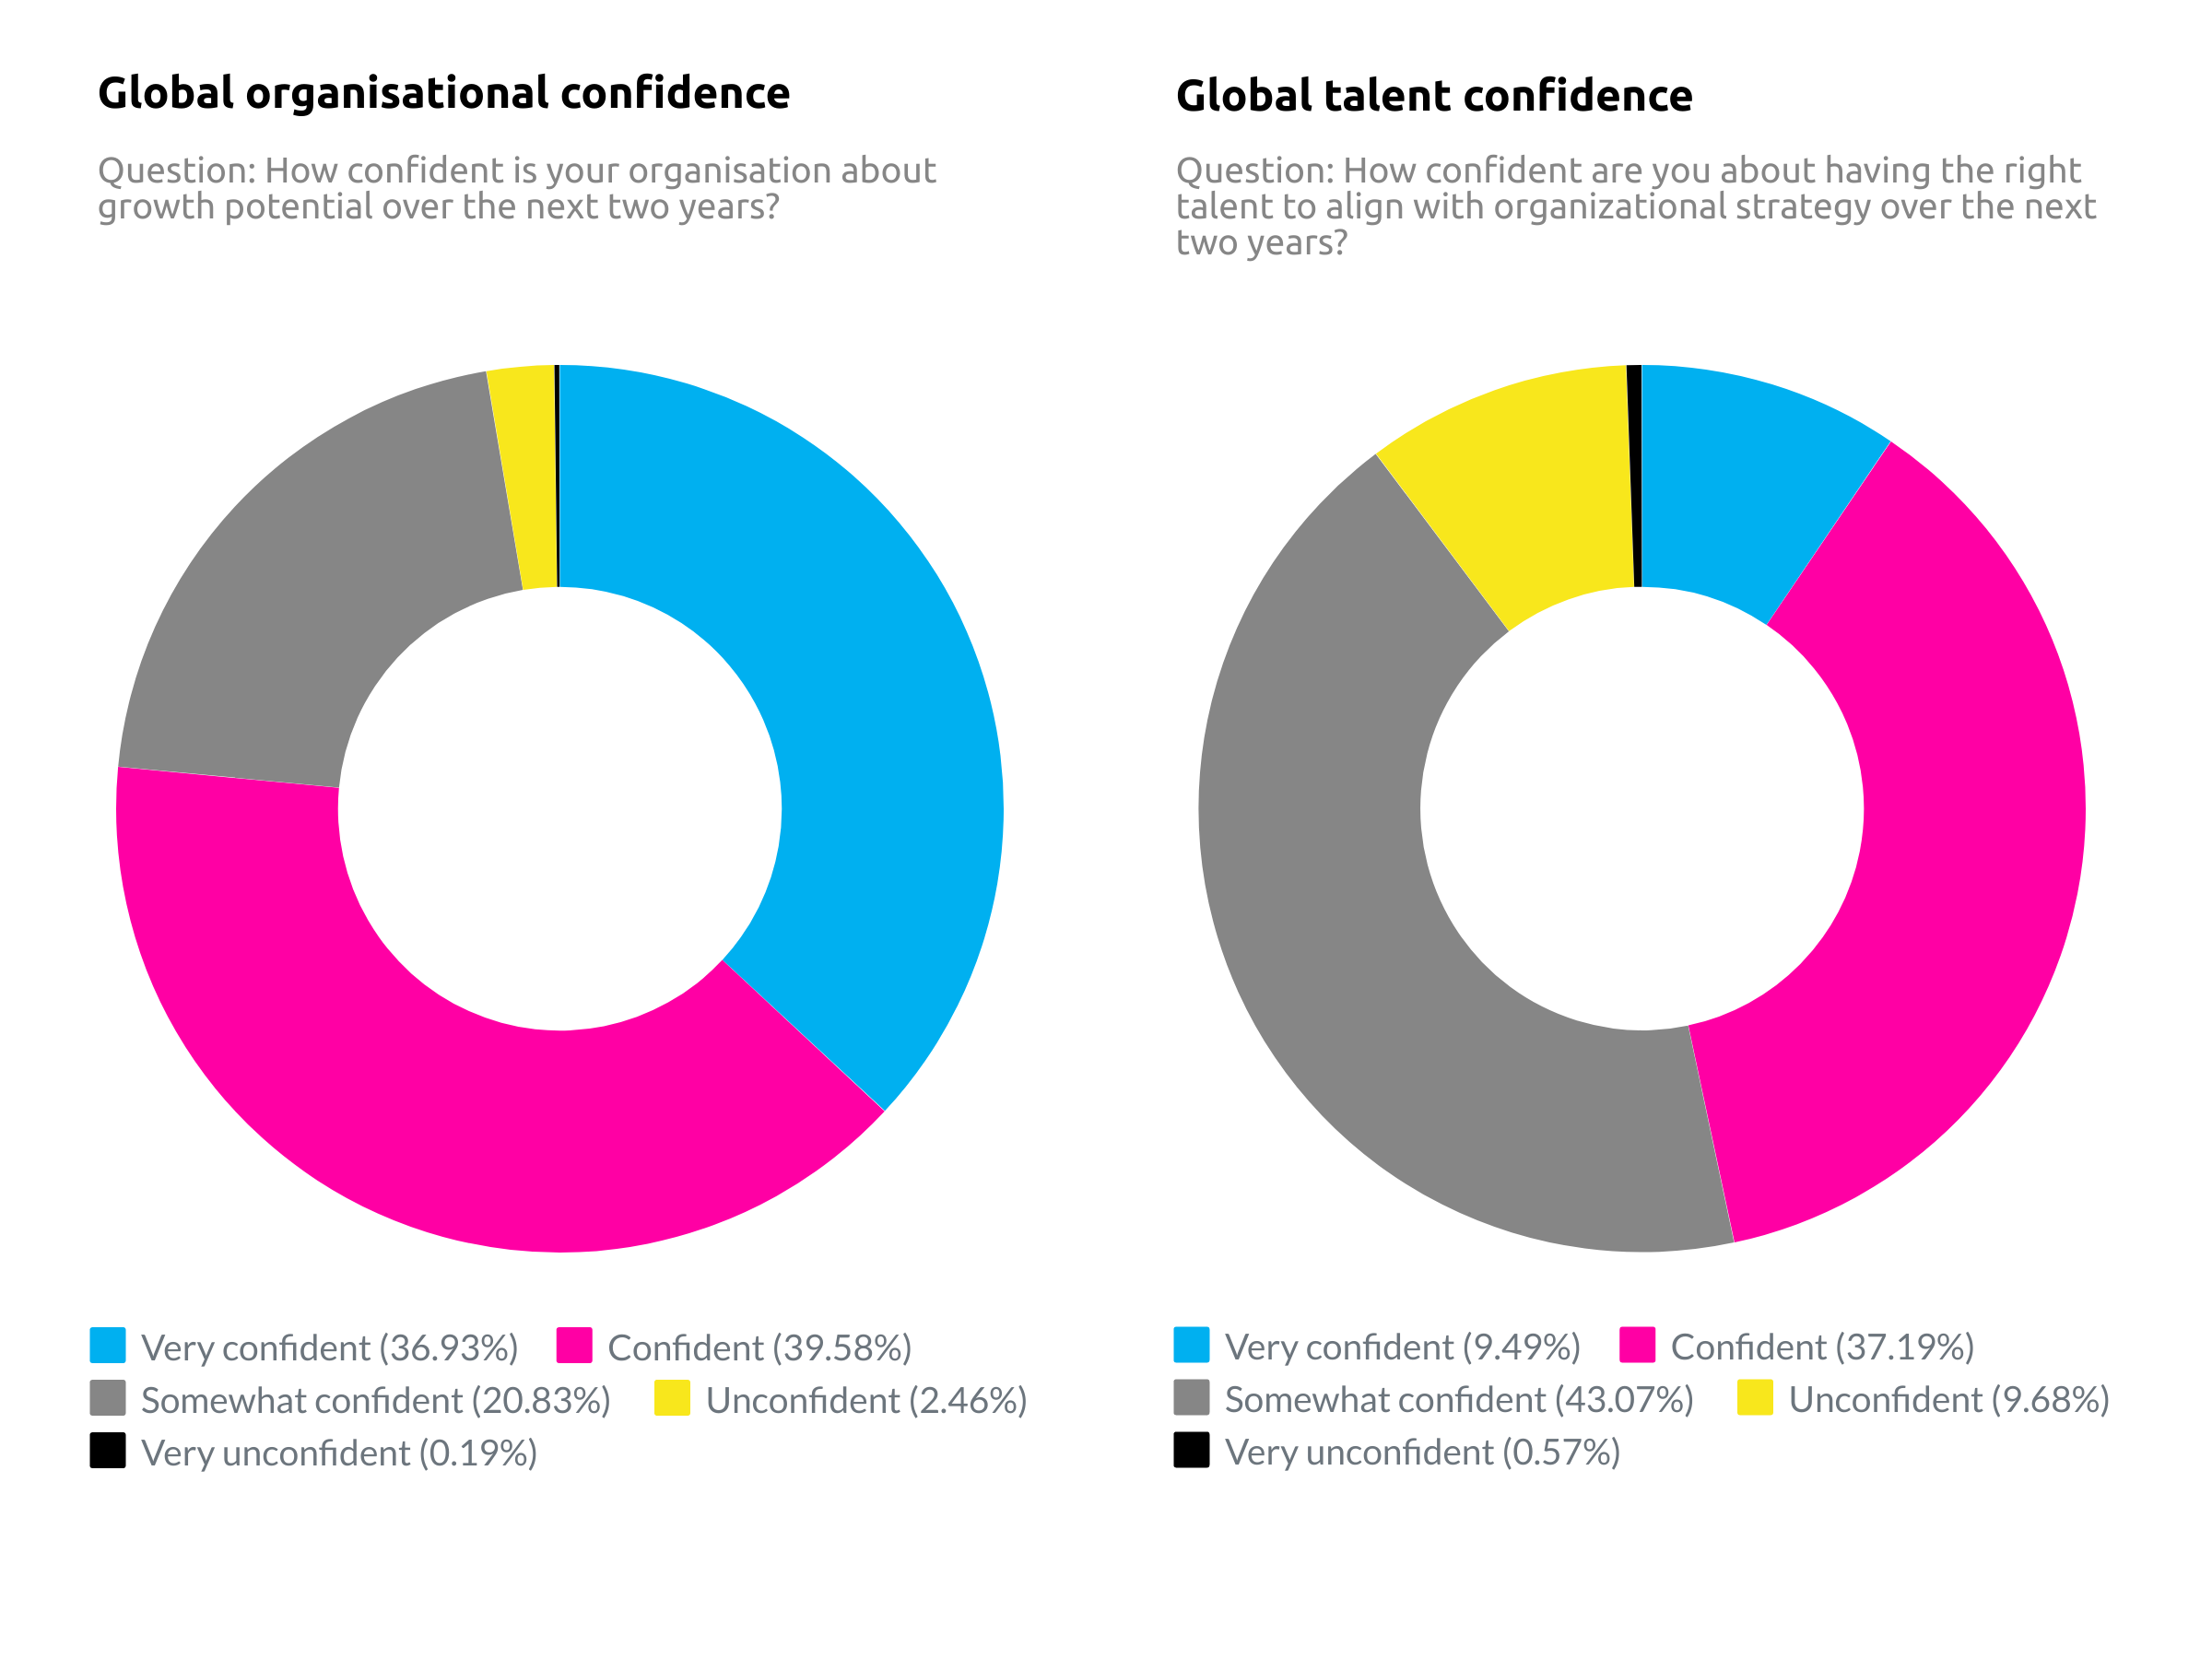 Global Organisational and Talent Confidence